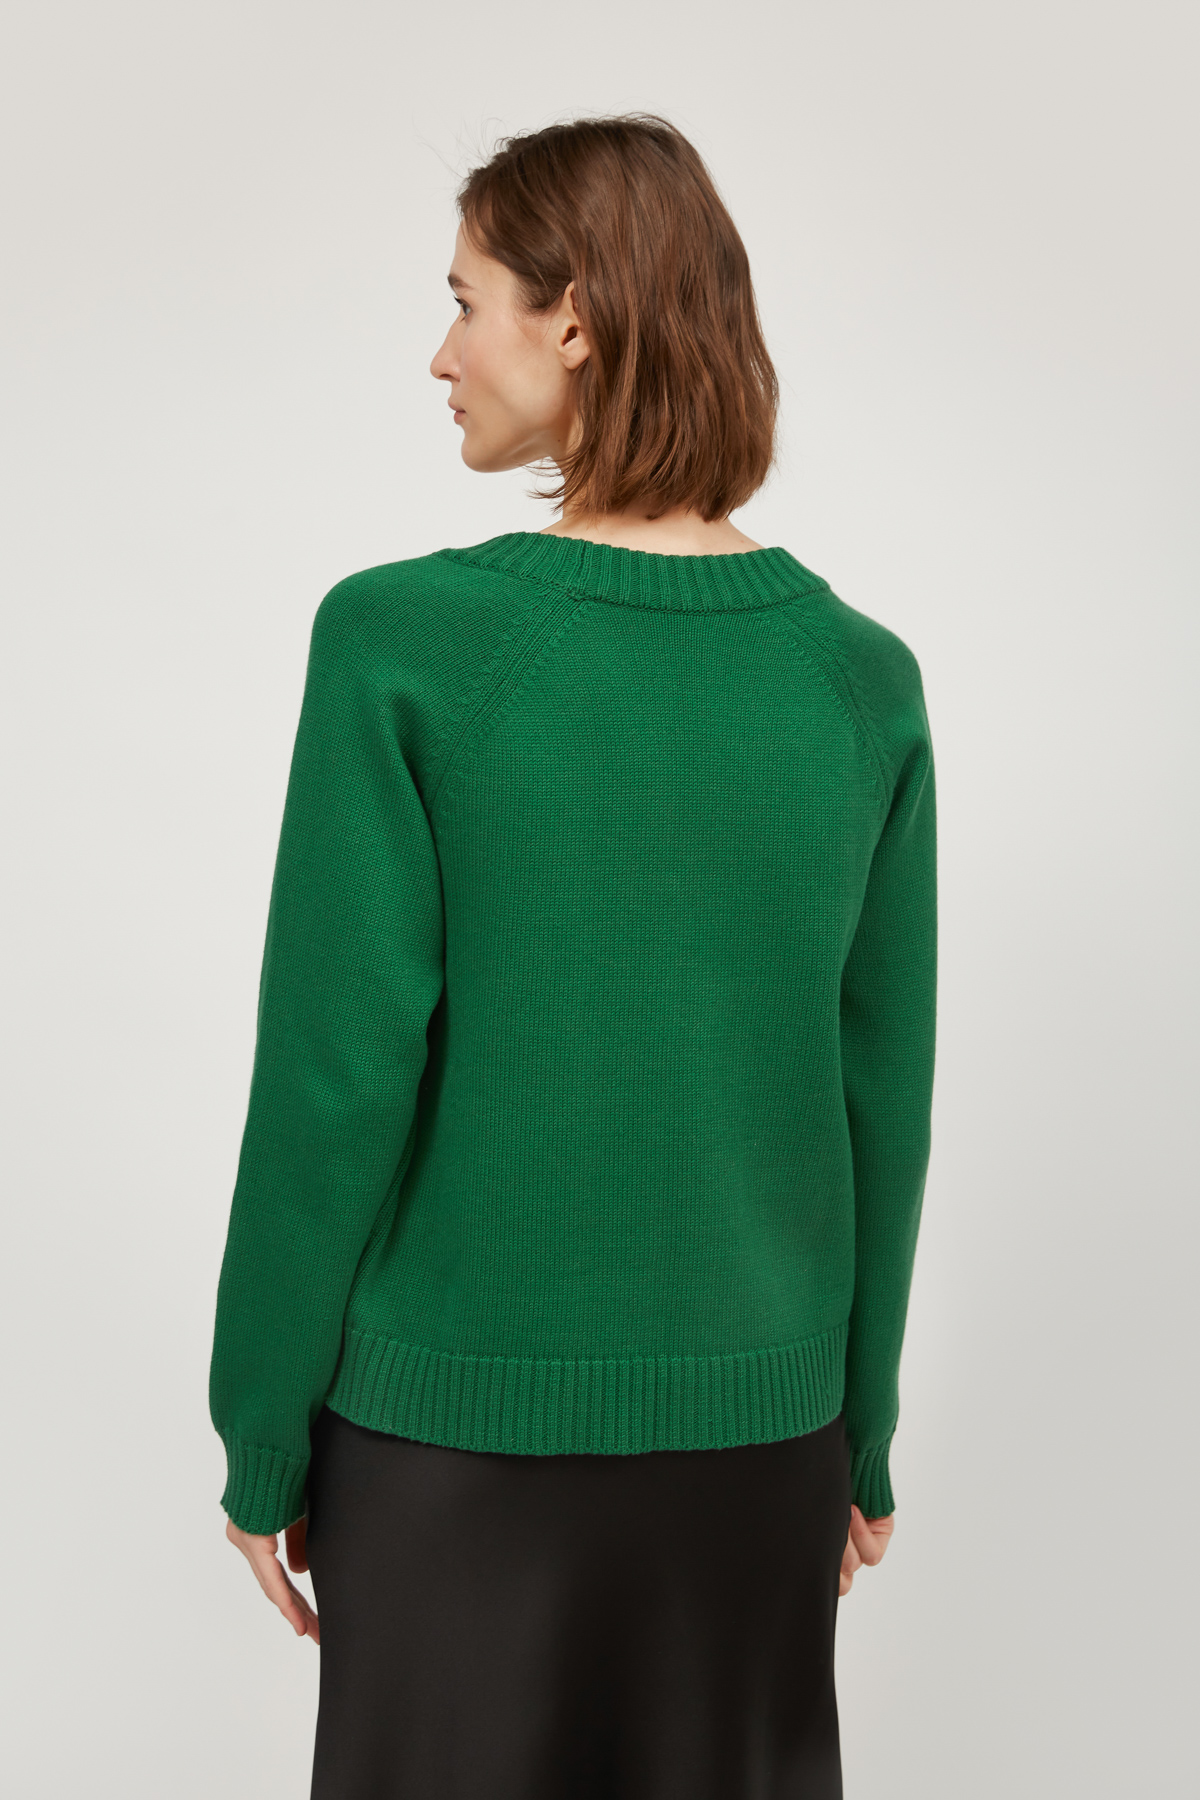 Green cropped knitted cardigan, photo 5